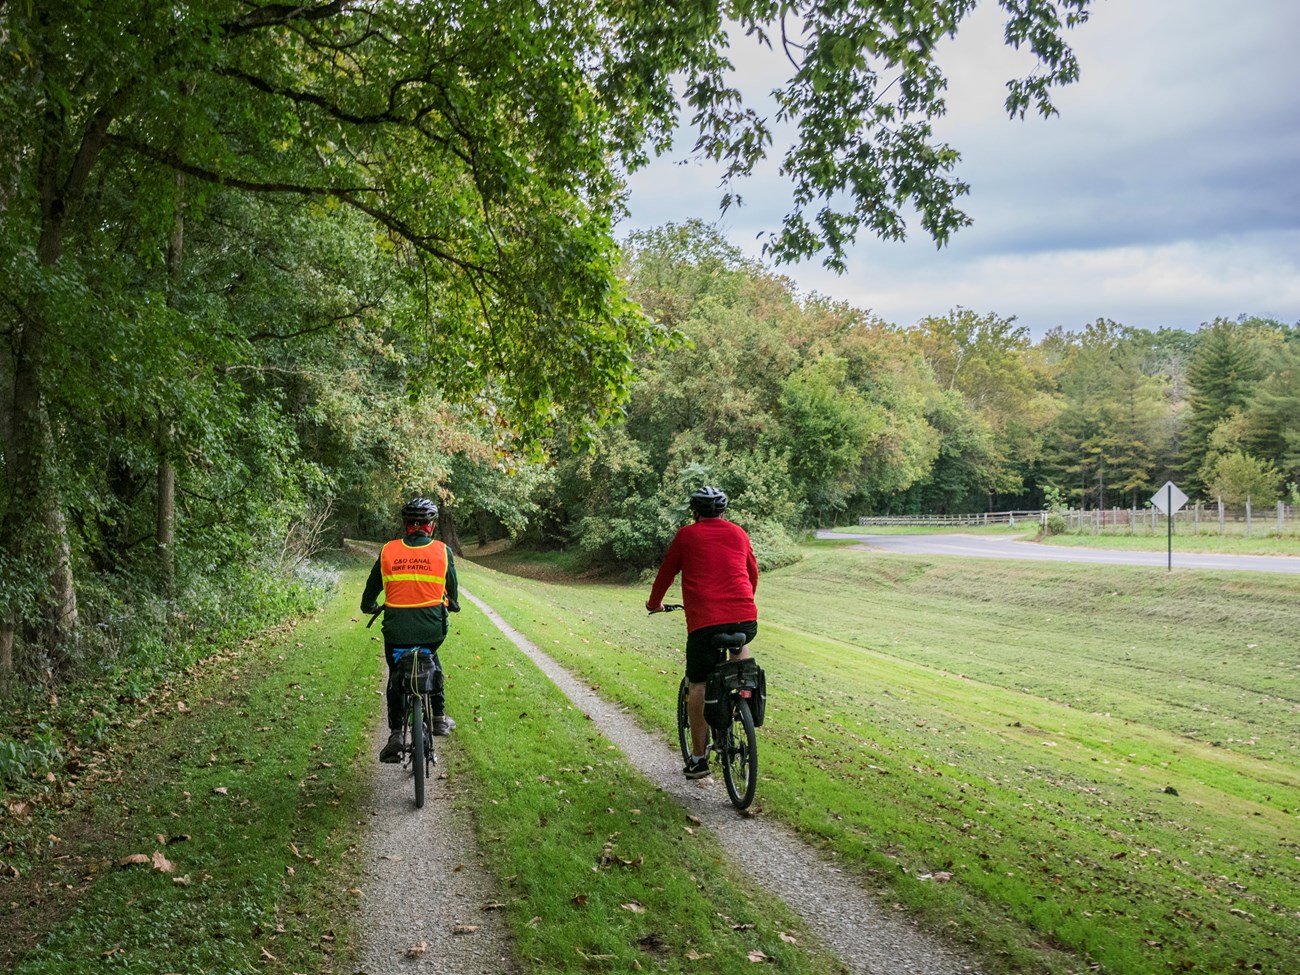 Two bikers travel along the grass and gravel towpath